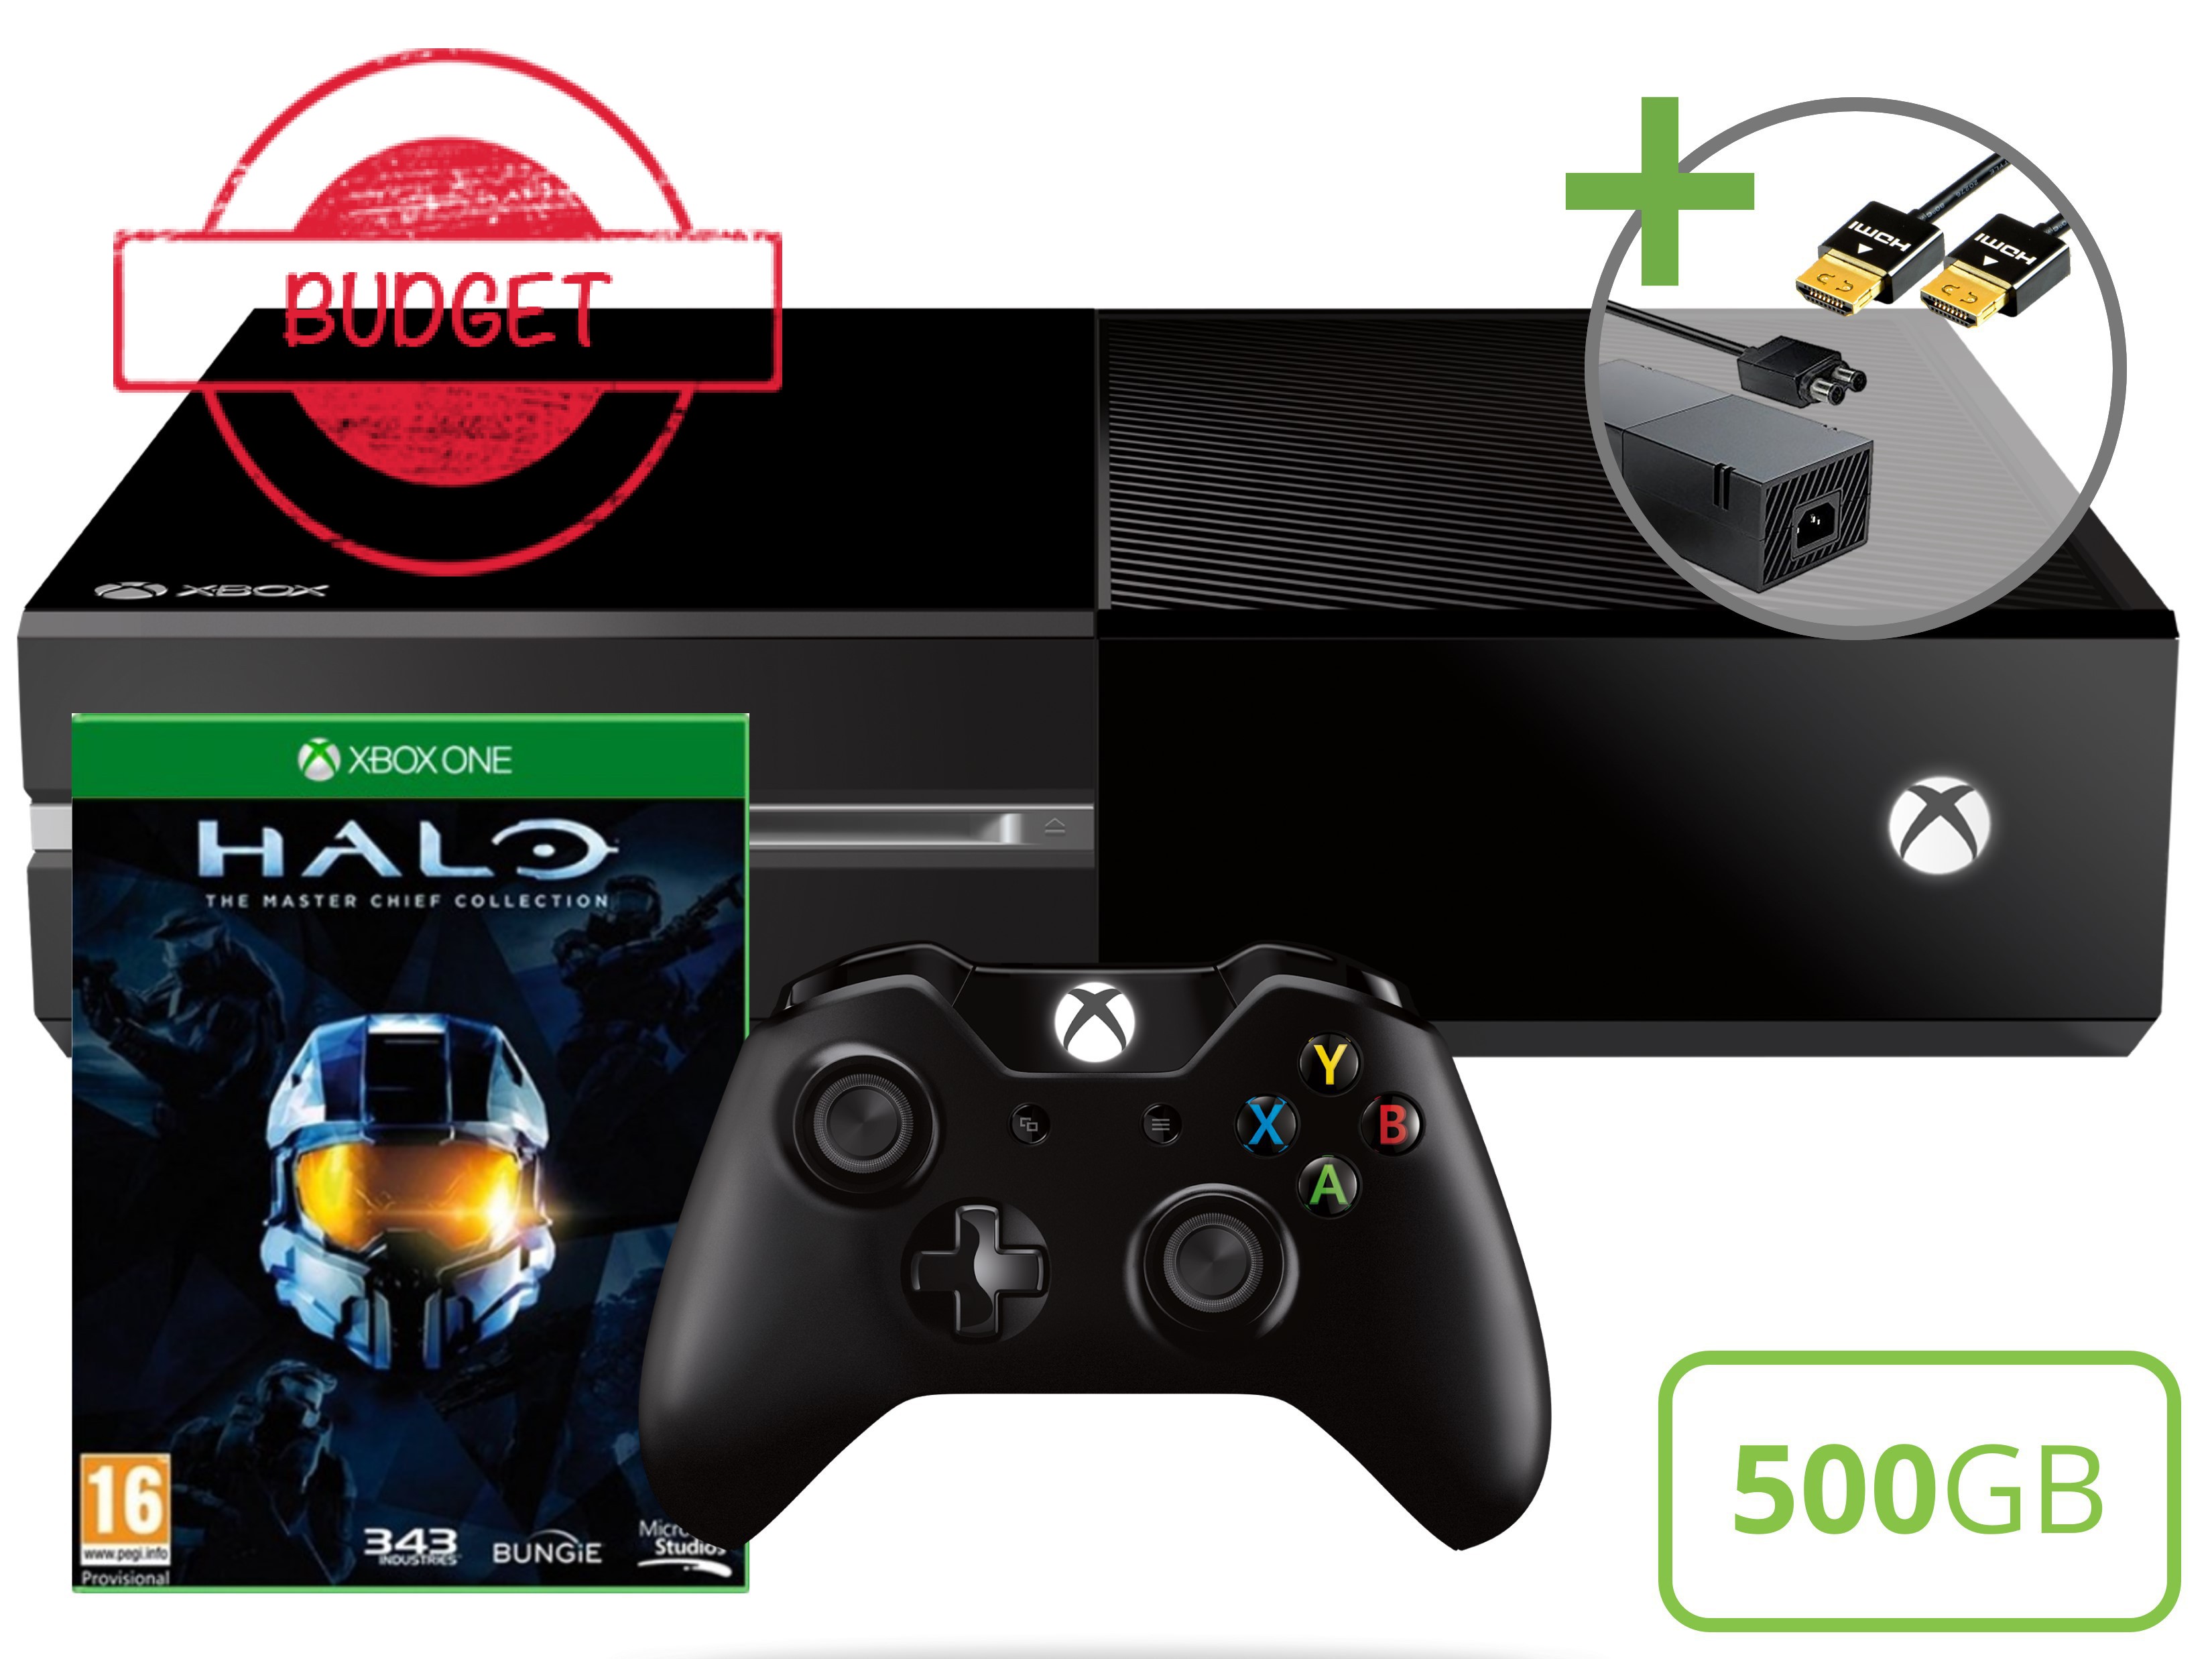 Microsoft Xbox One Starter Pack - 500GB Halo The Master Chief Collection Edition - Budget Kopen | Xbox One Hardware